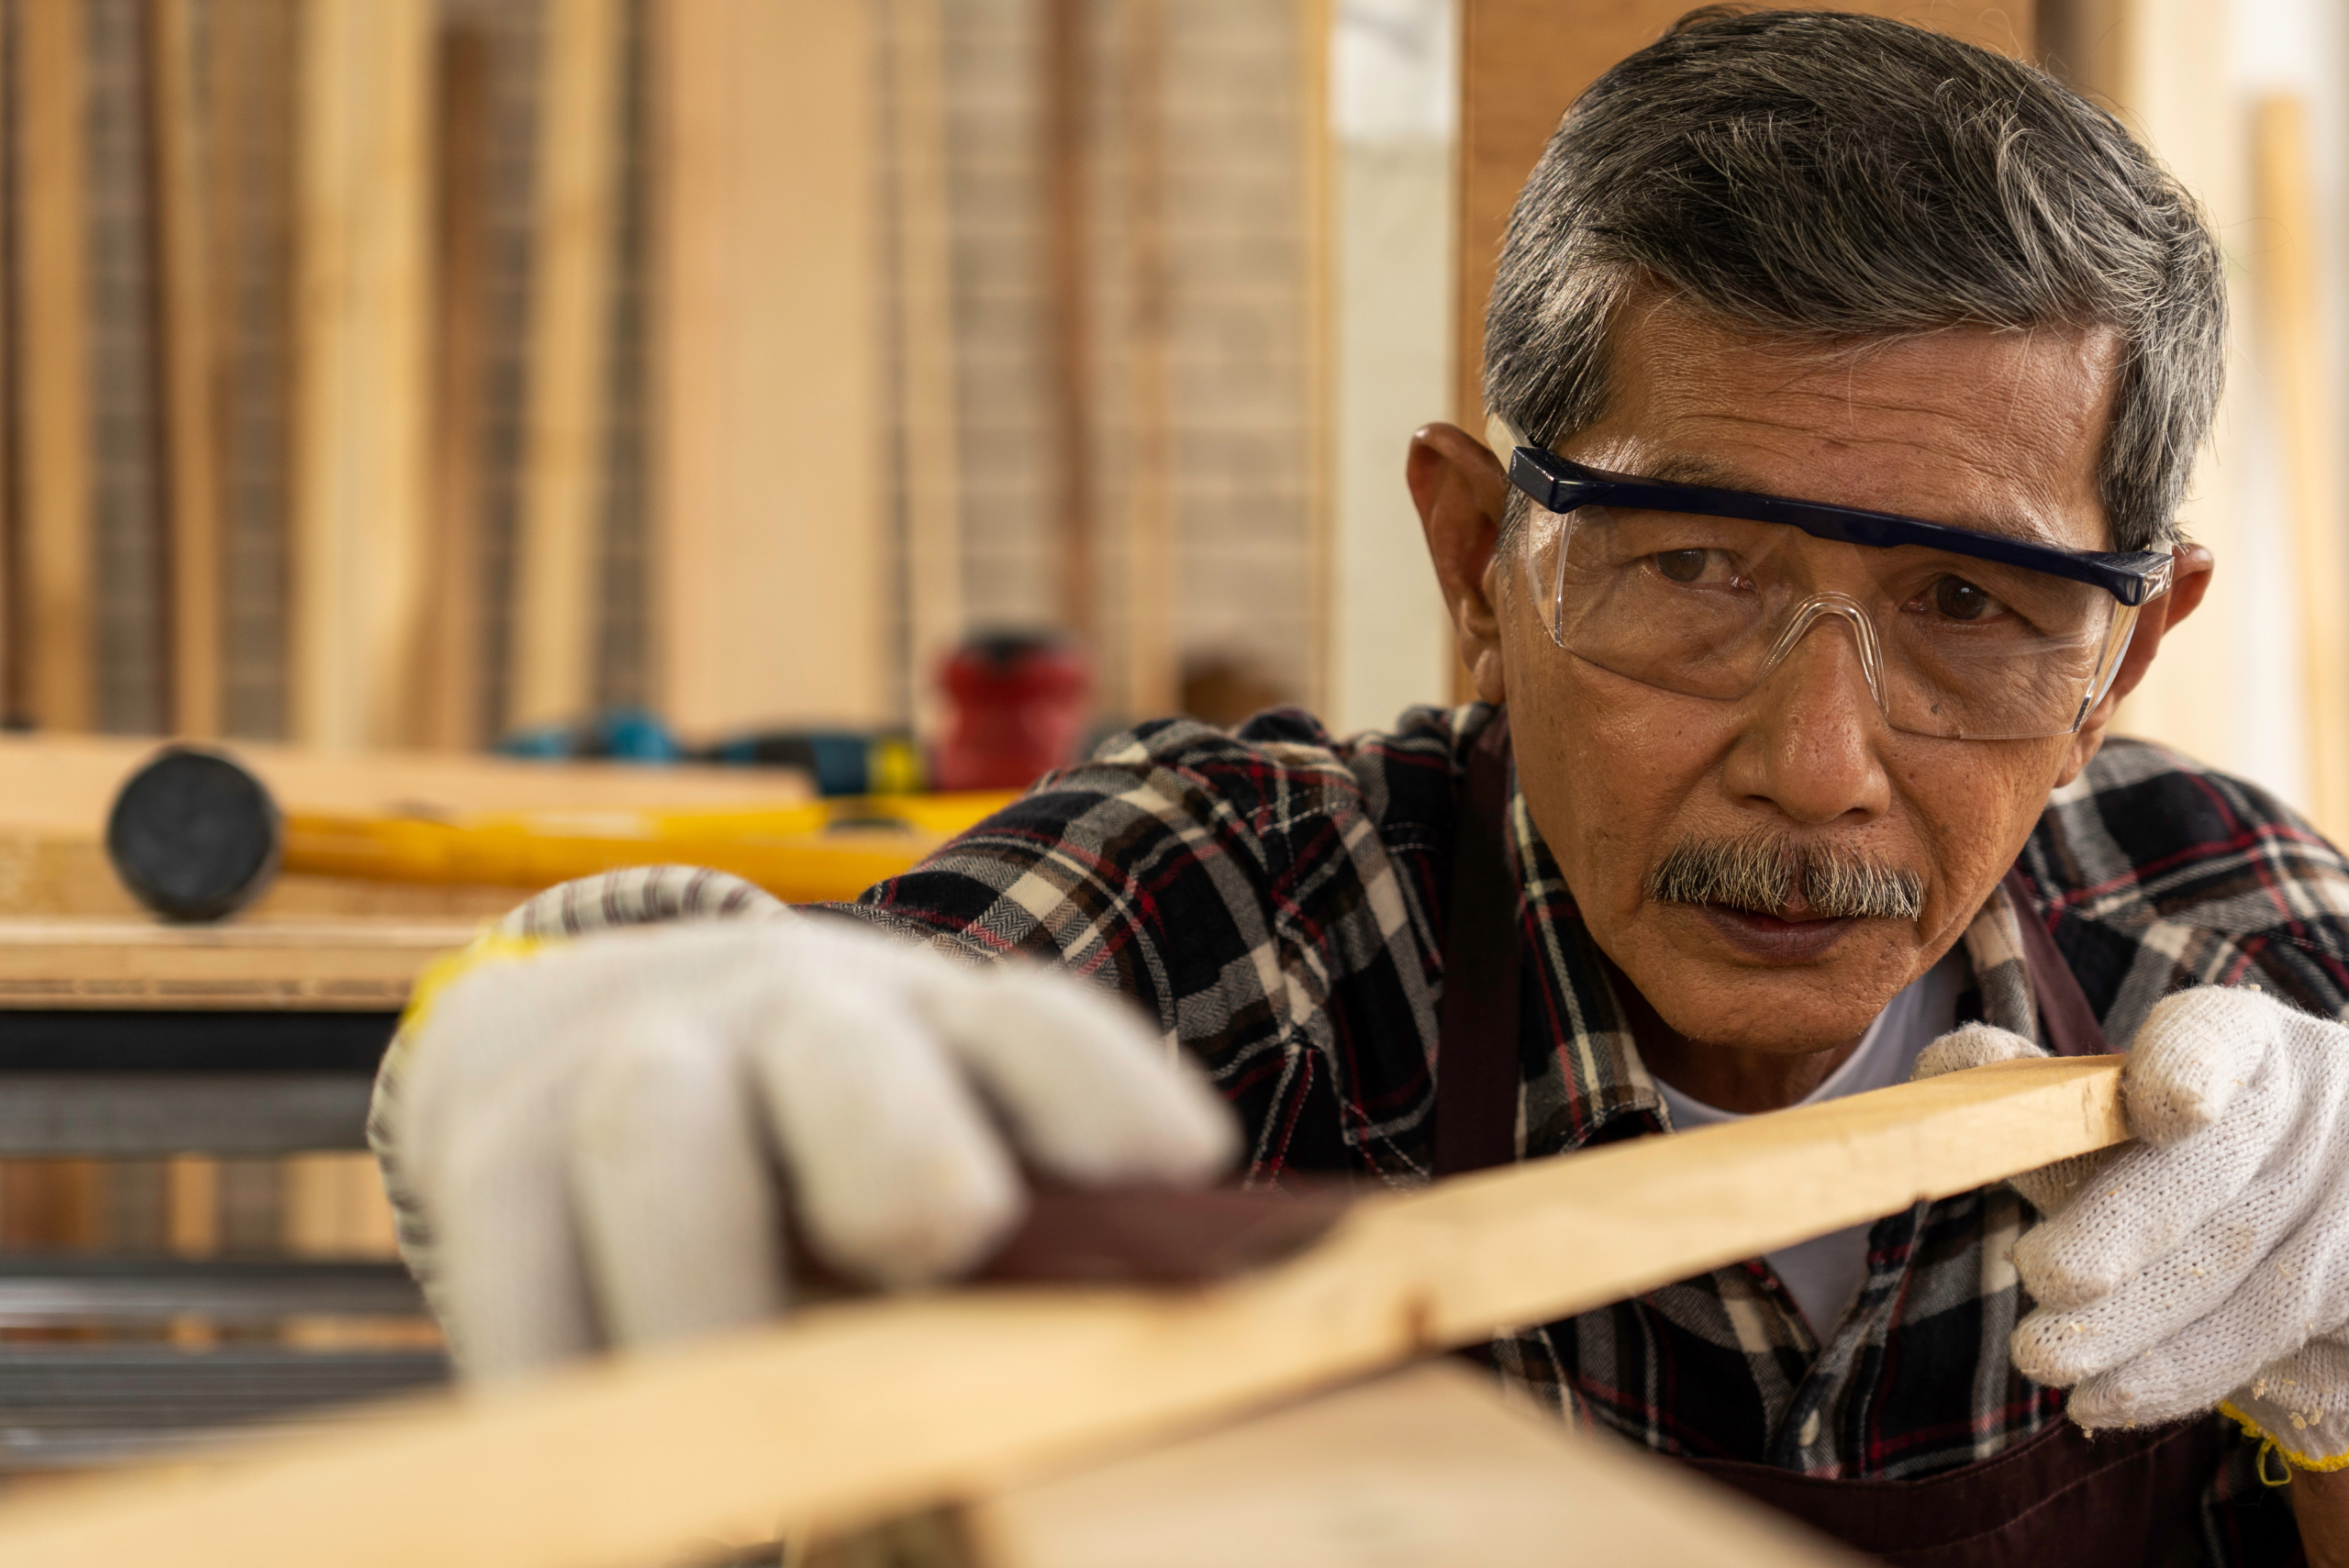 Worker wearing safety glasses and gloves while working with wood